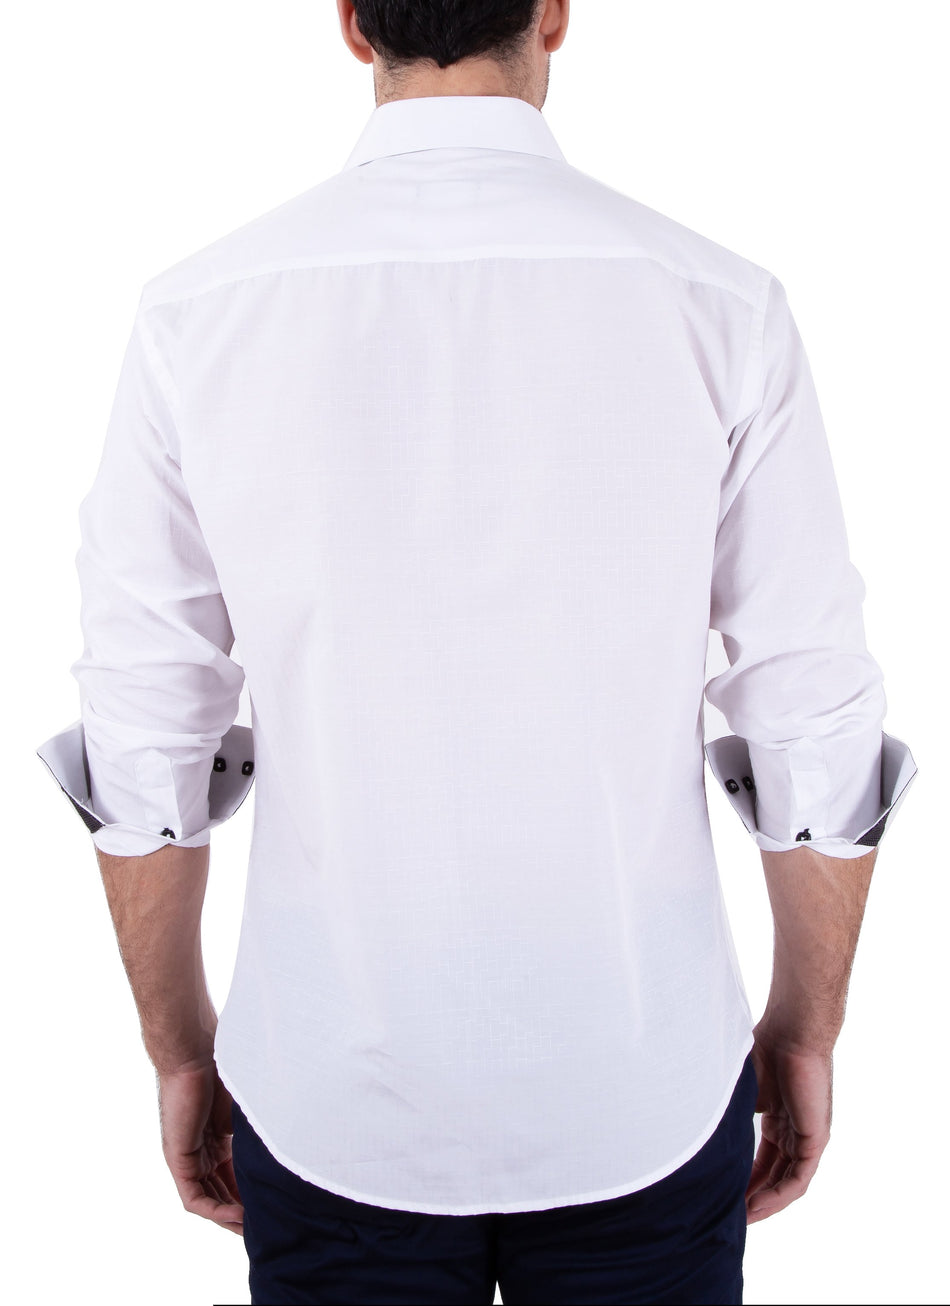 Simple Texture Pattern Long Sleeve Dress Shirt Solid White